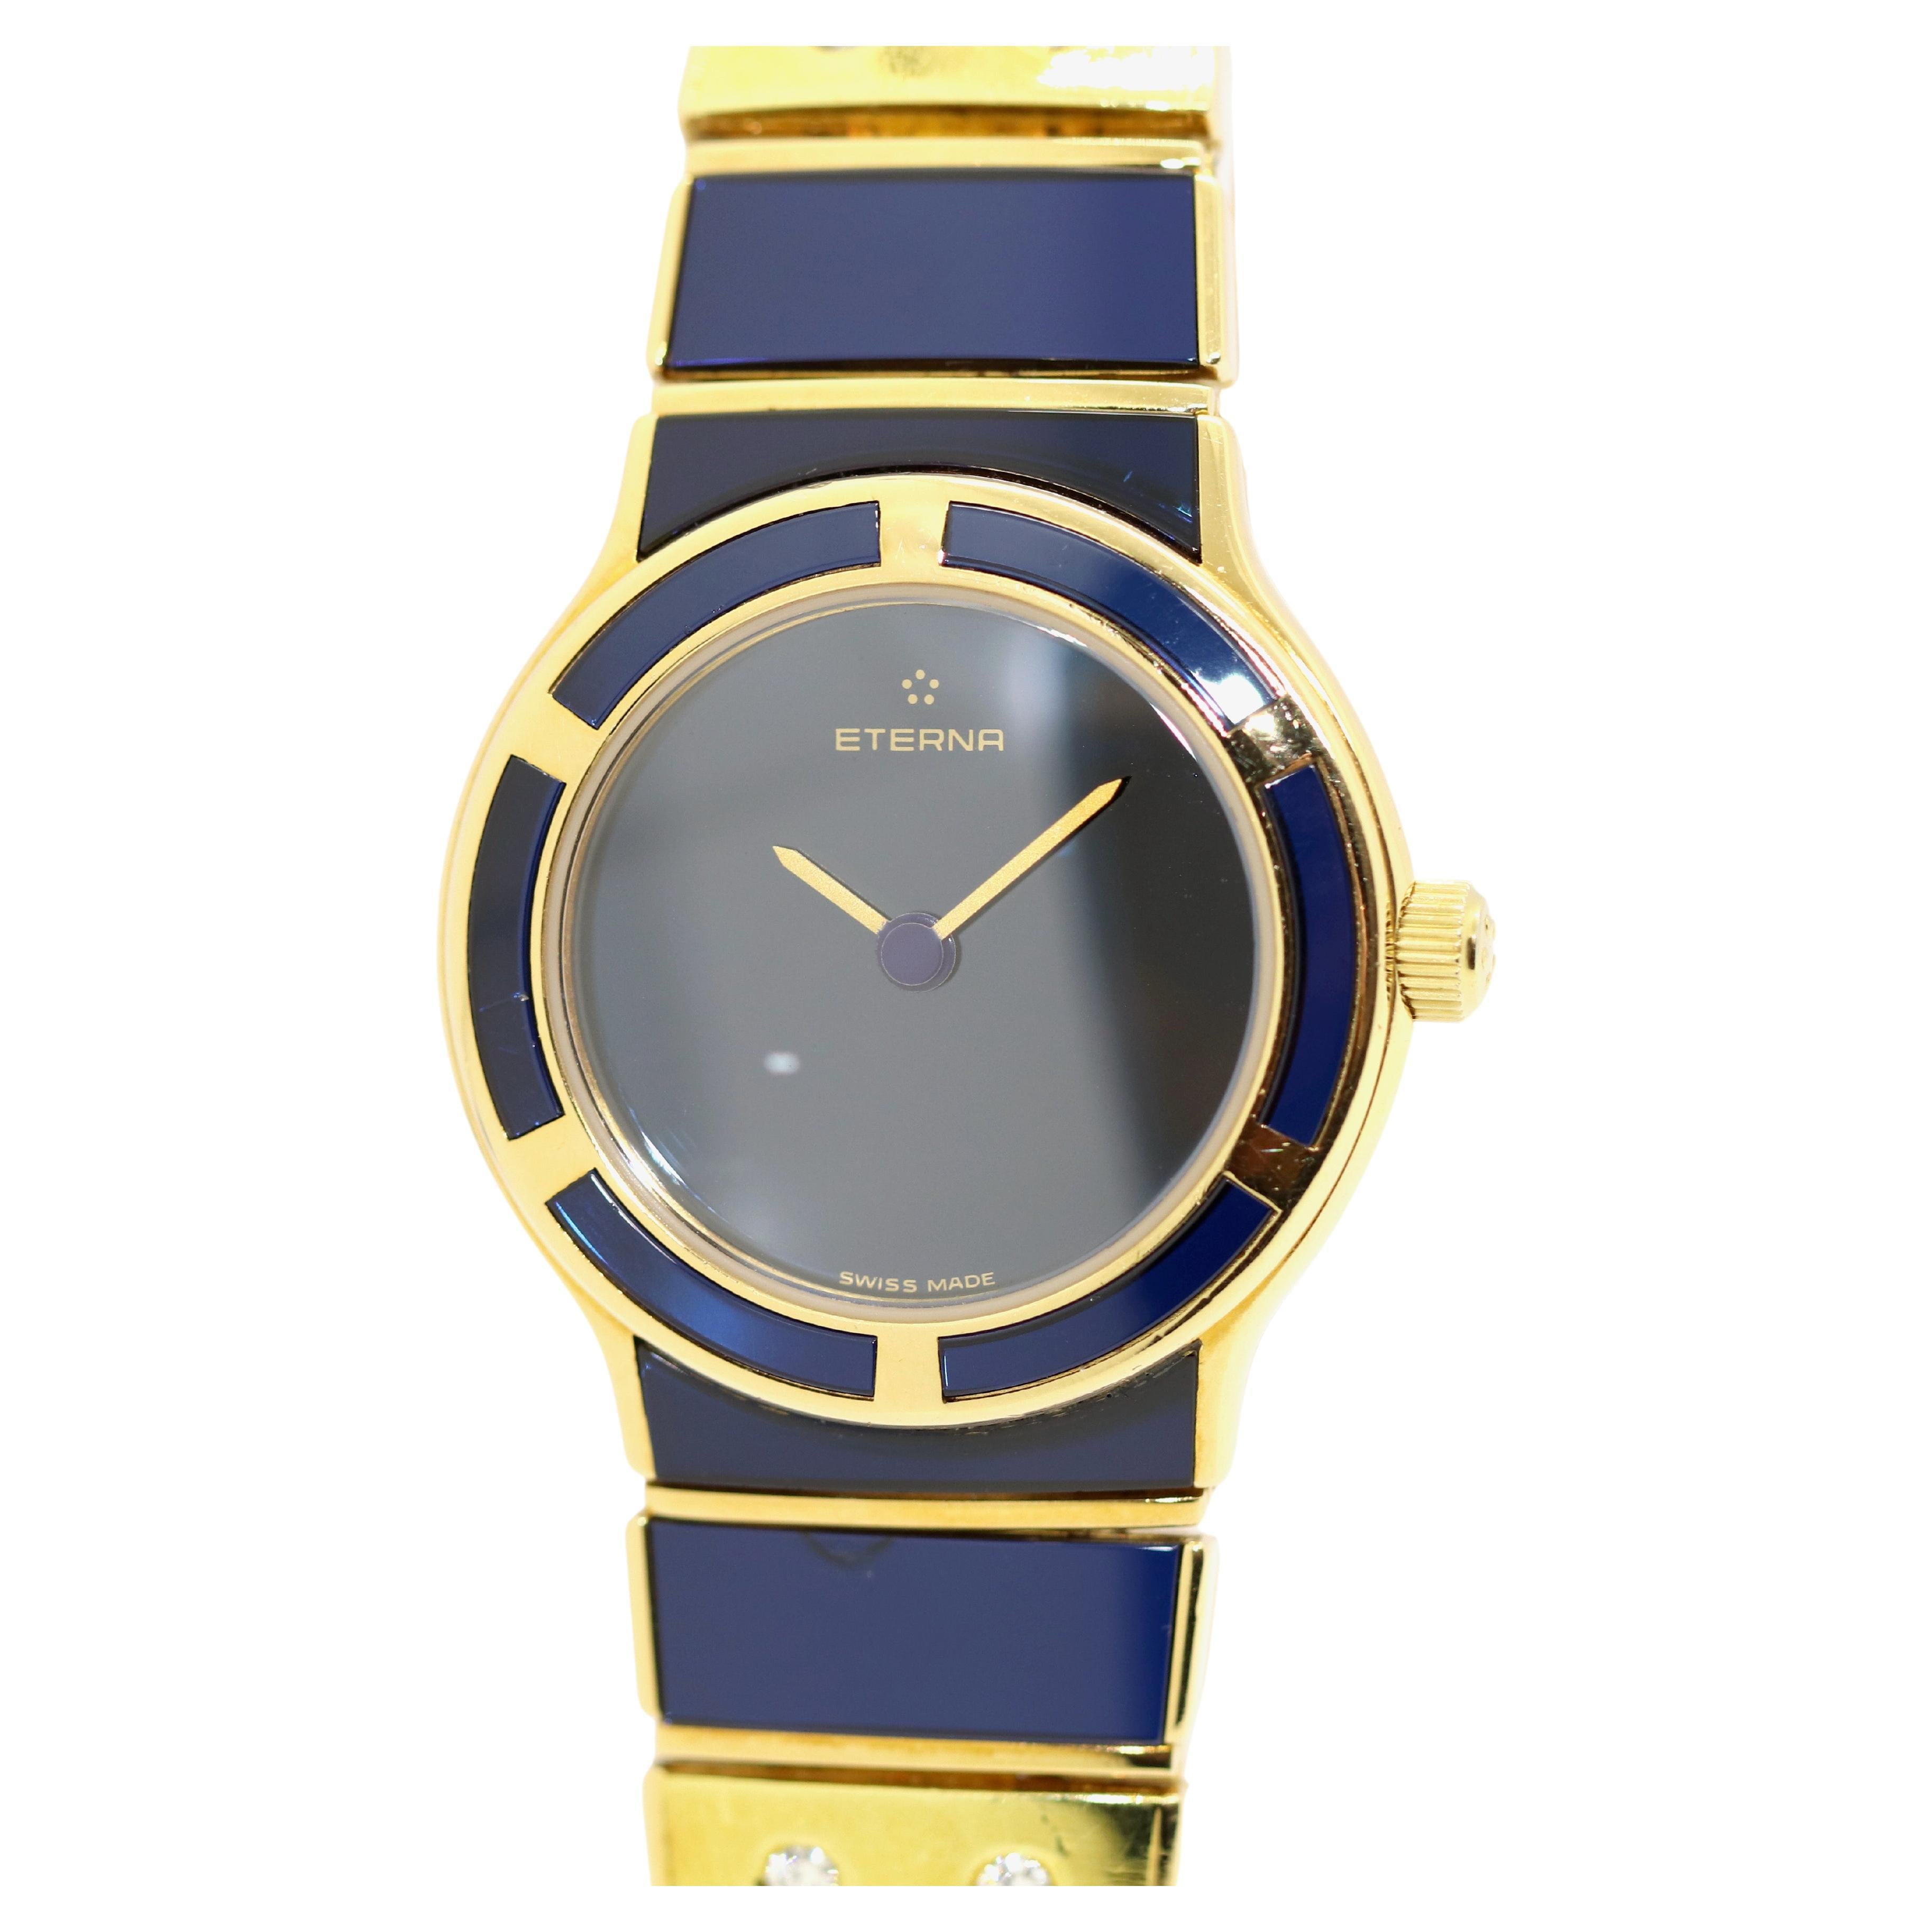 Limited 18 Karat Gold Ladies Wrist Watch by Eterna, Model Galaxis, Number 007 For Sale